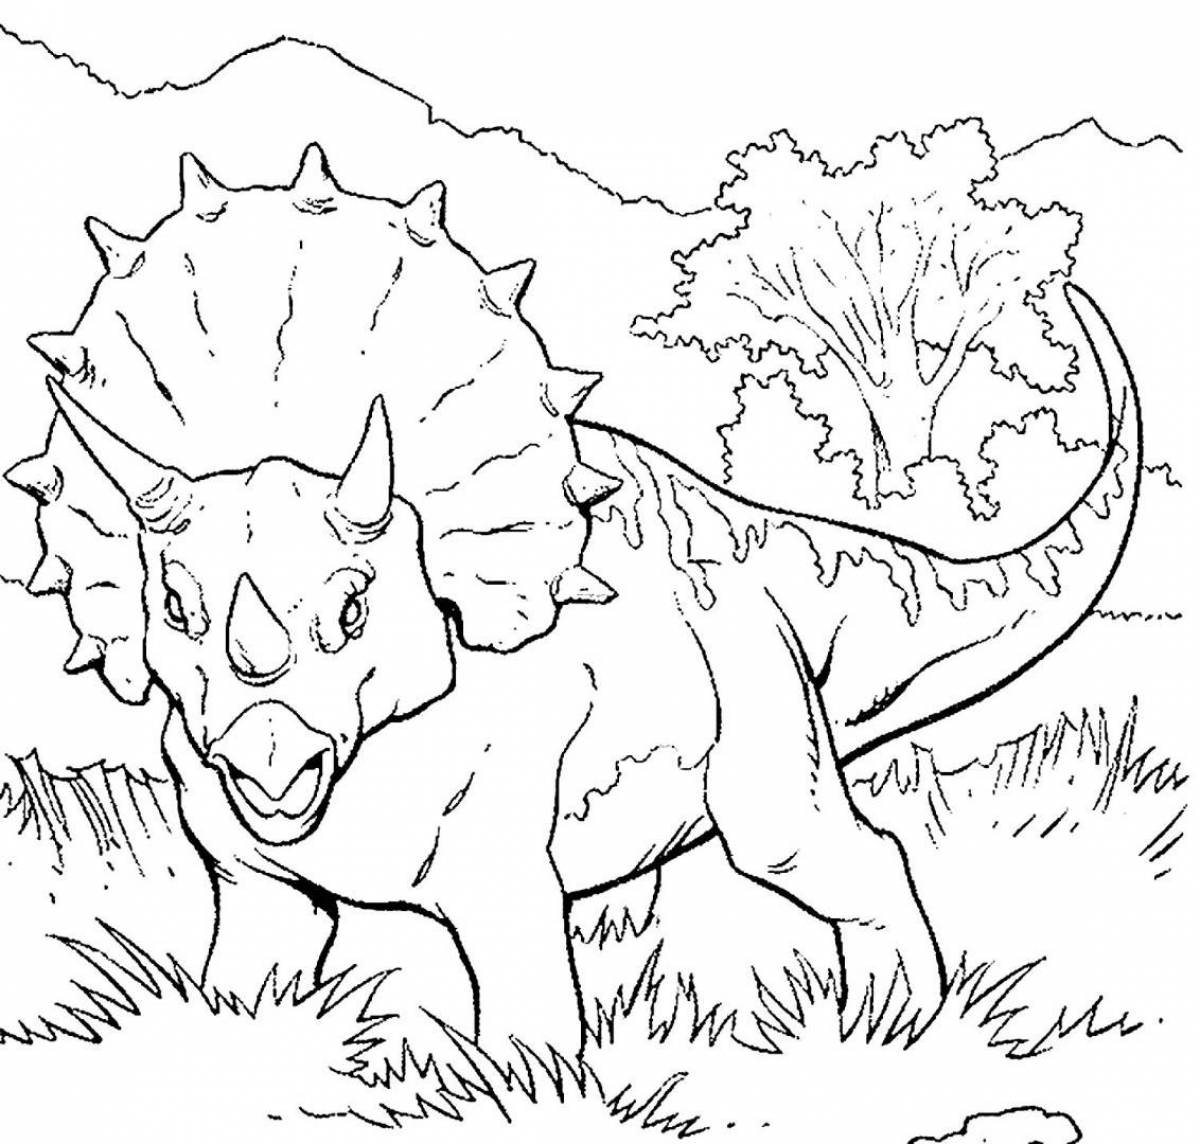 Coloring dinosaurs for kids